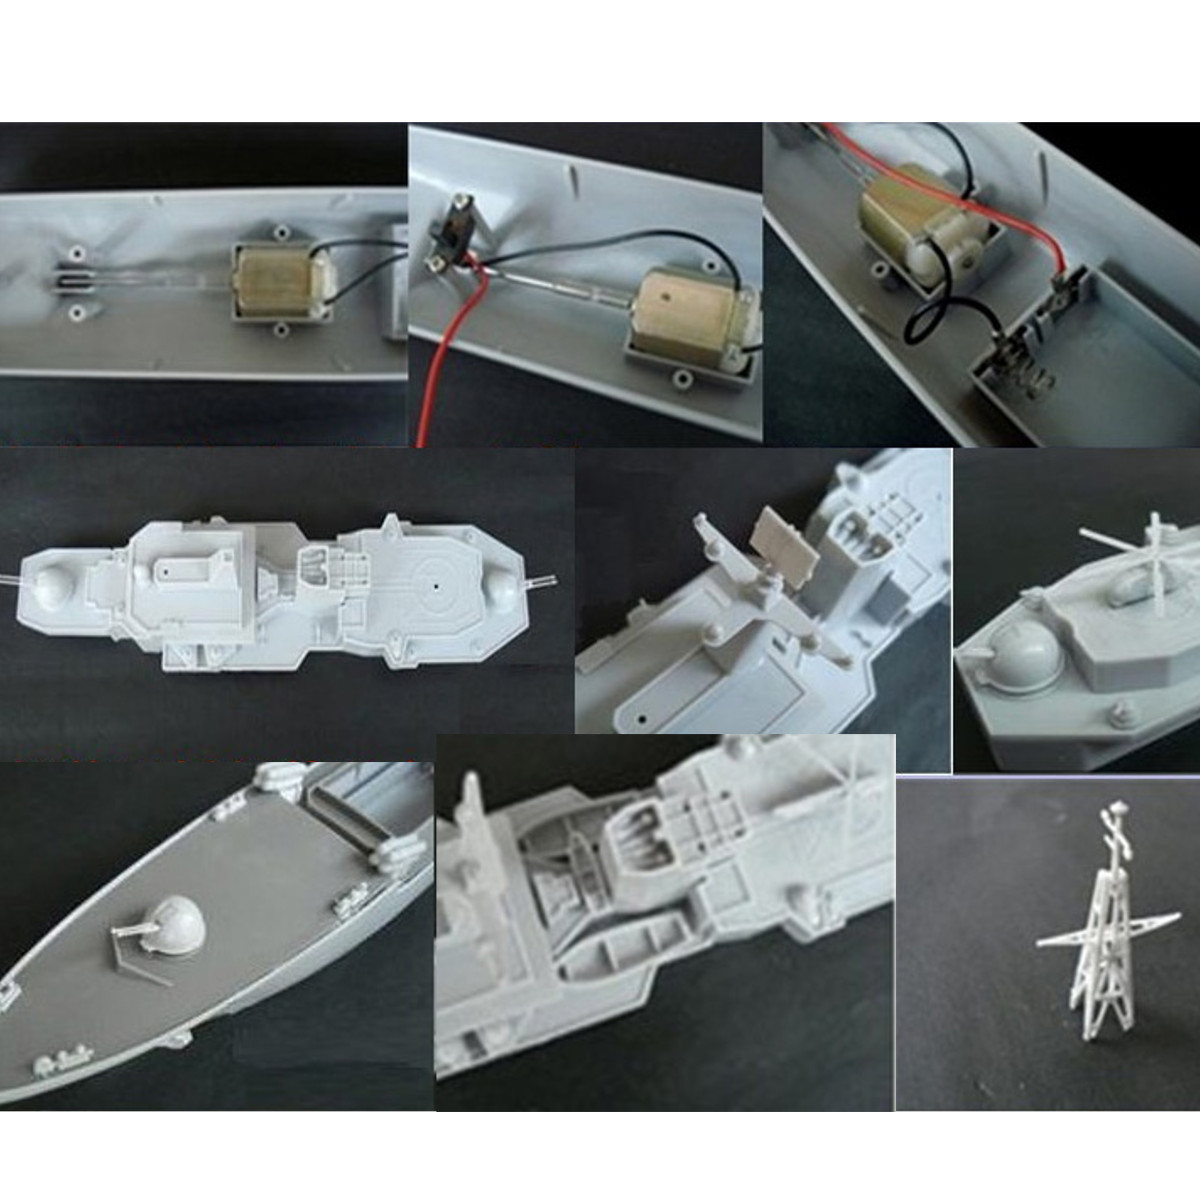 1:480 Scale Ship Model Plastic Destroyer Ship Boat Electric Sailboat Kids Toy Gift With 130 Motor DIY Ship Assembly Model Kits